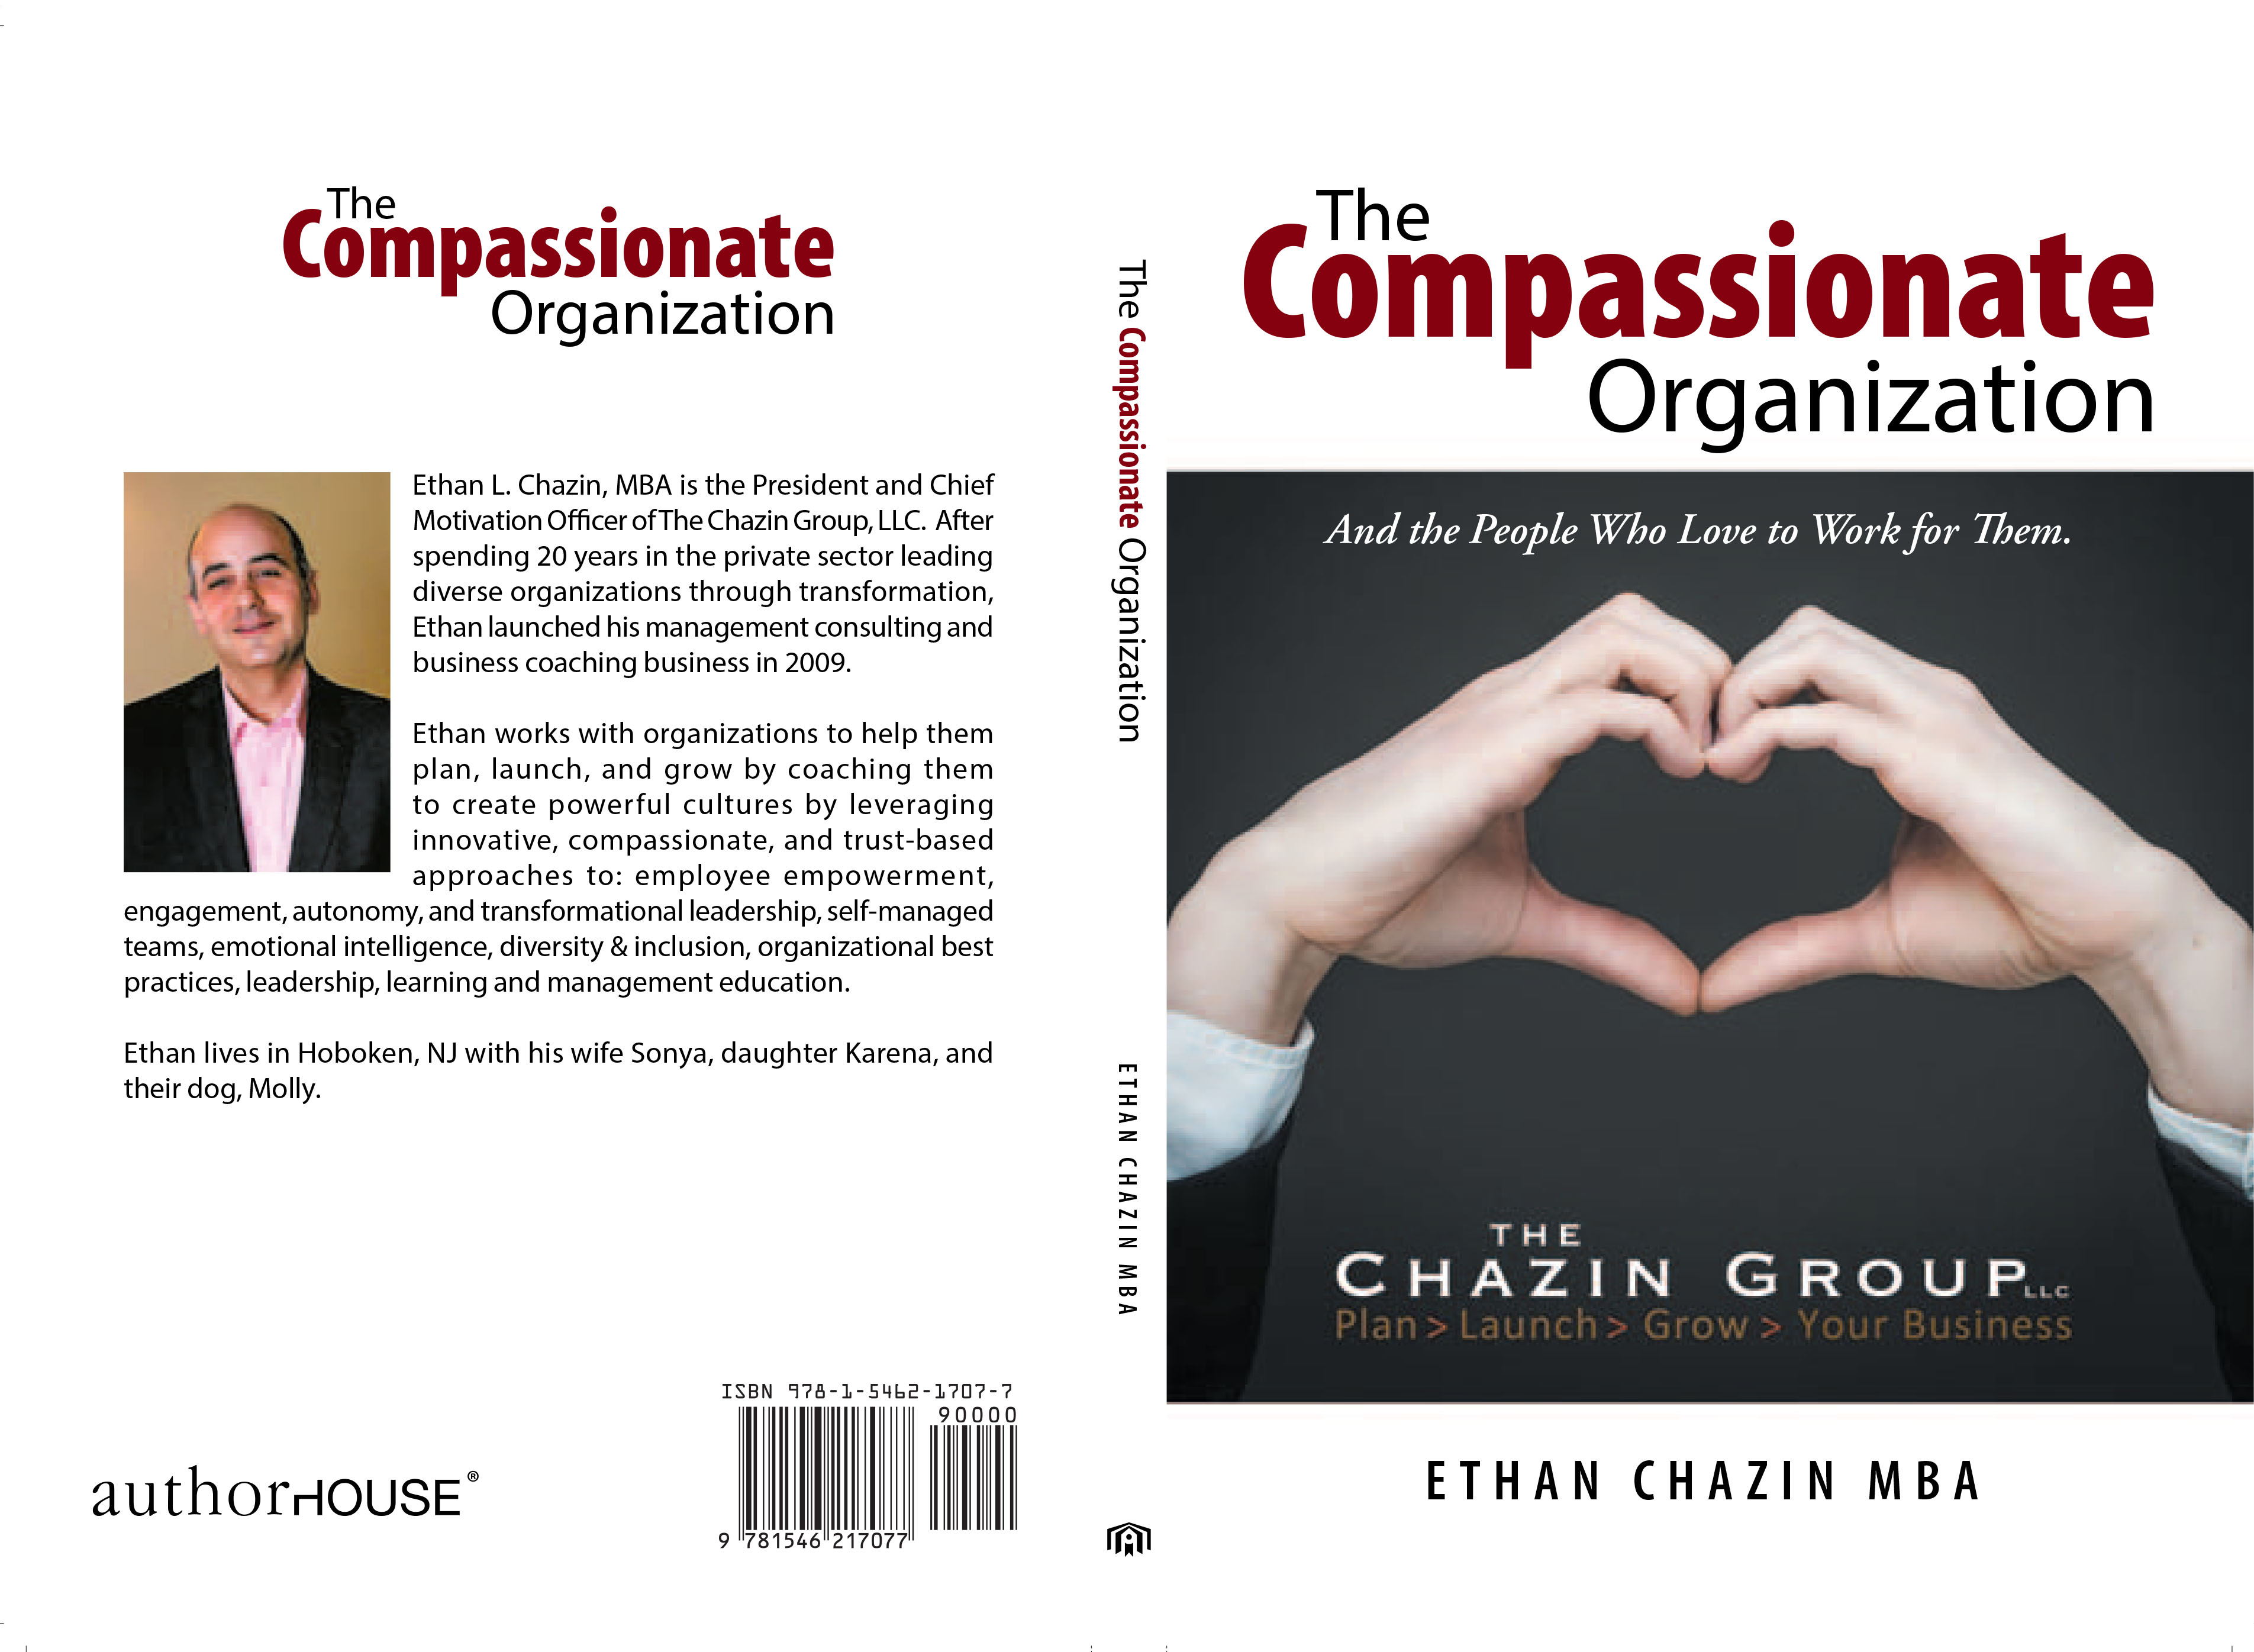 The Compassionate Organization: and the people who love to work for them